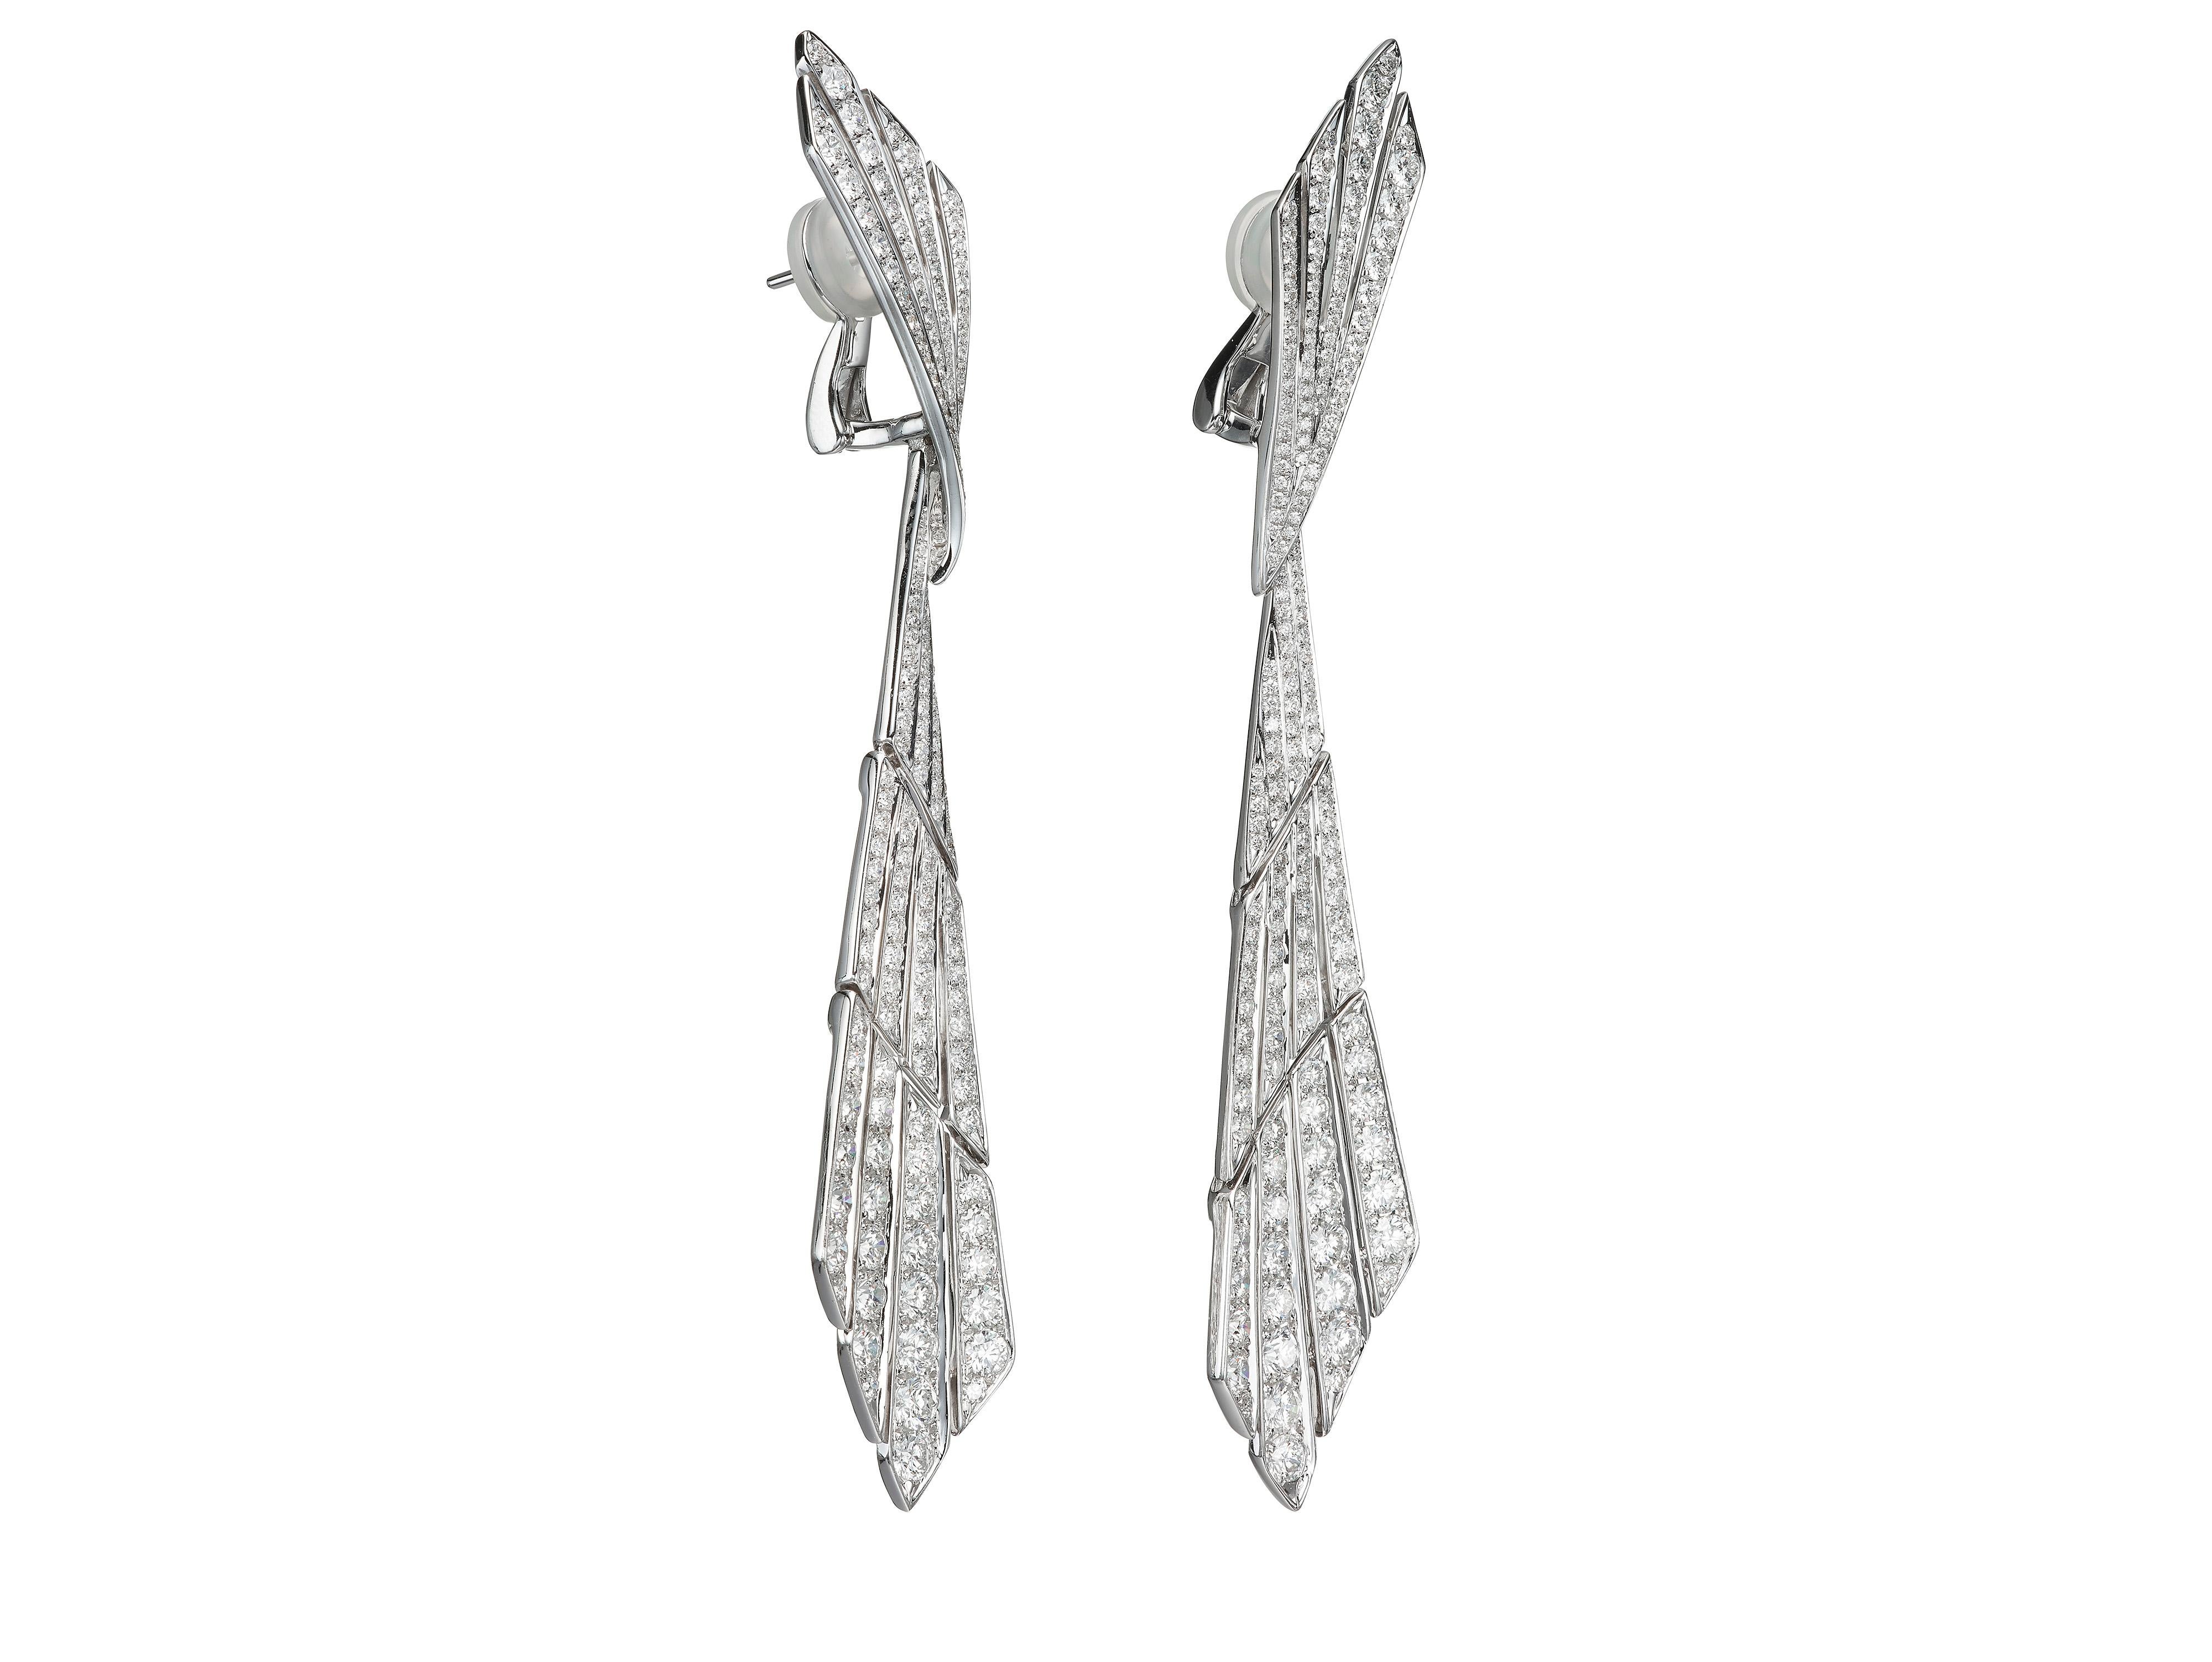 Butani’s diamond earrings feature an Art Deco-inspired chandelier design crafted with geometric silhouettes and sparkling white diamonds.  Total diamond weight 6.62 carats.  In 18K white gold.

Composition:
18K White Gold
350 Round Diamonds: 6.62